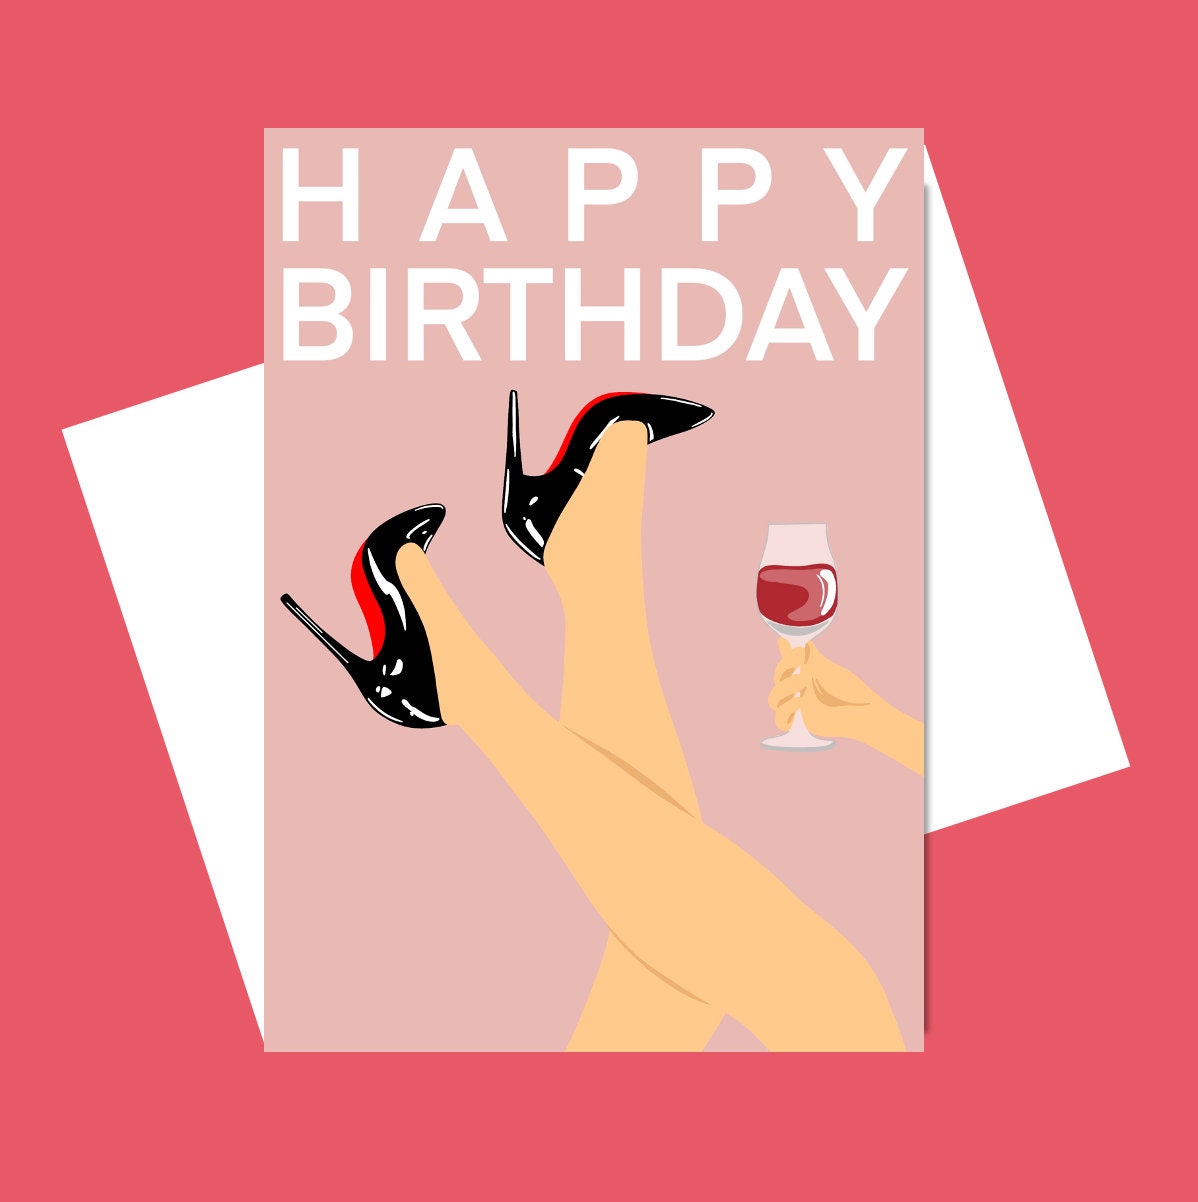 Birthday girl card/Shoes and wine lover card/Designer girl card/fun birthday card/happy birthday card/Red wine lover card/Wine lover/Shoes